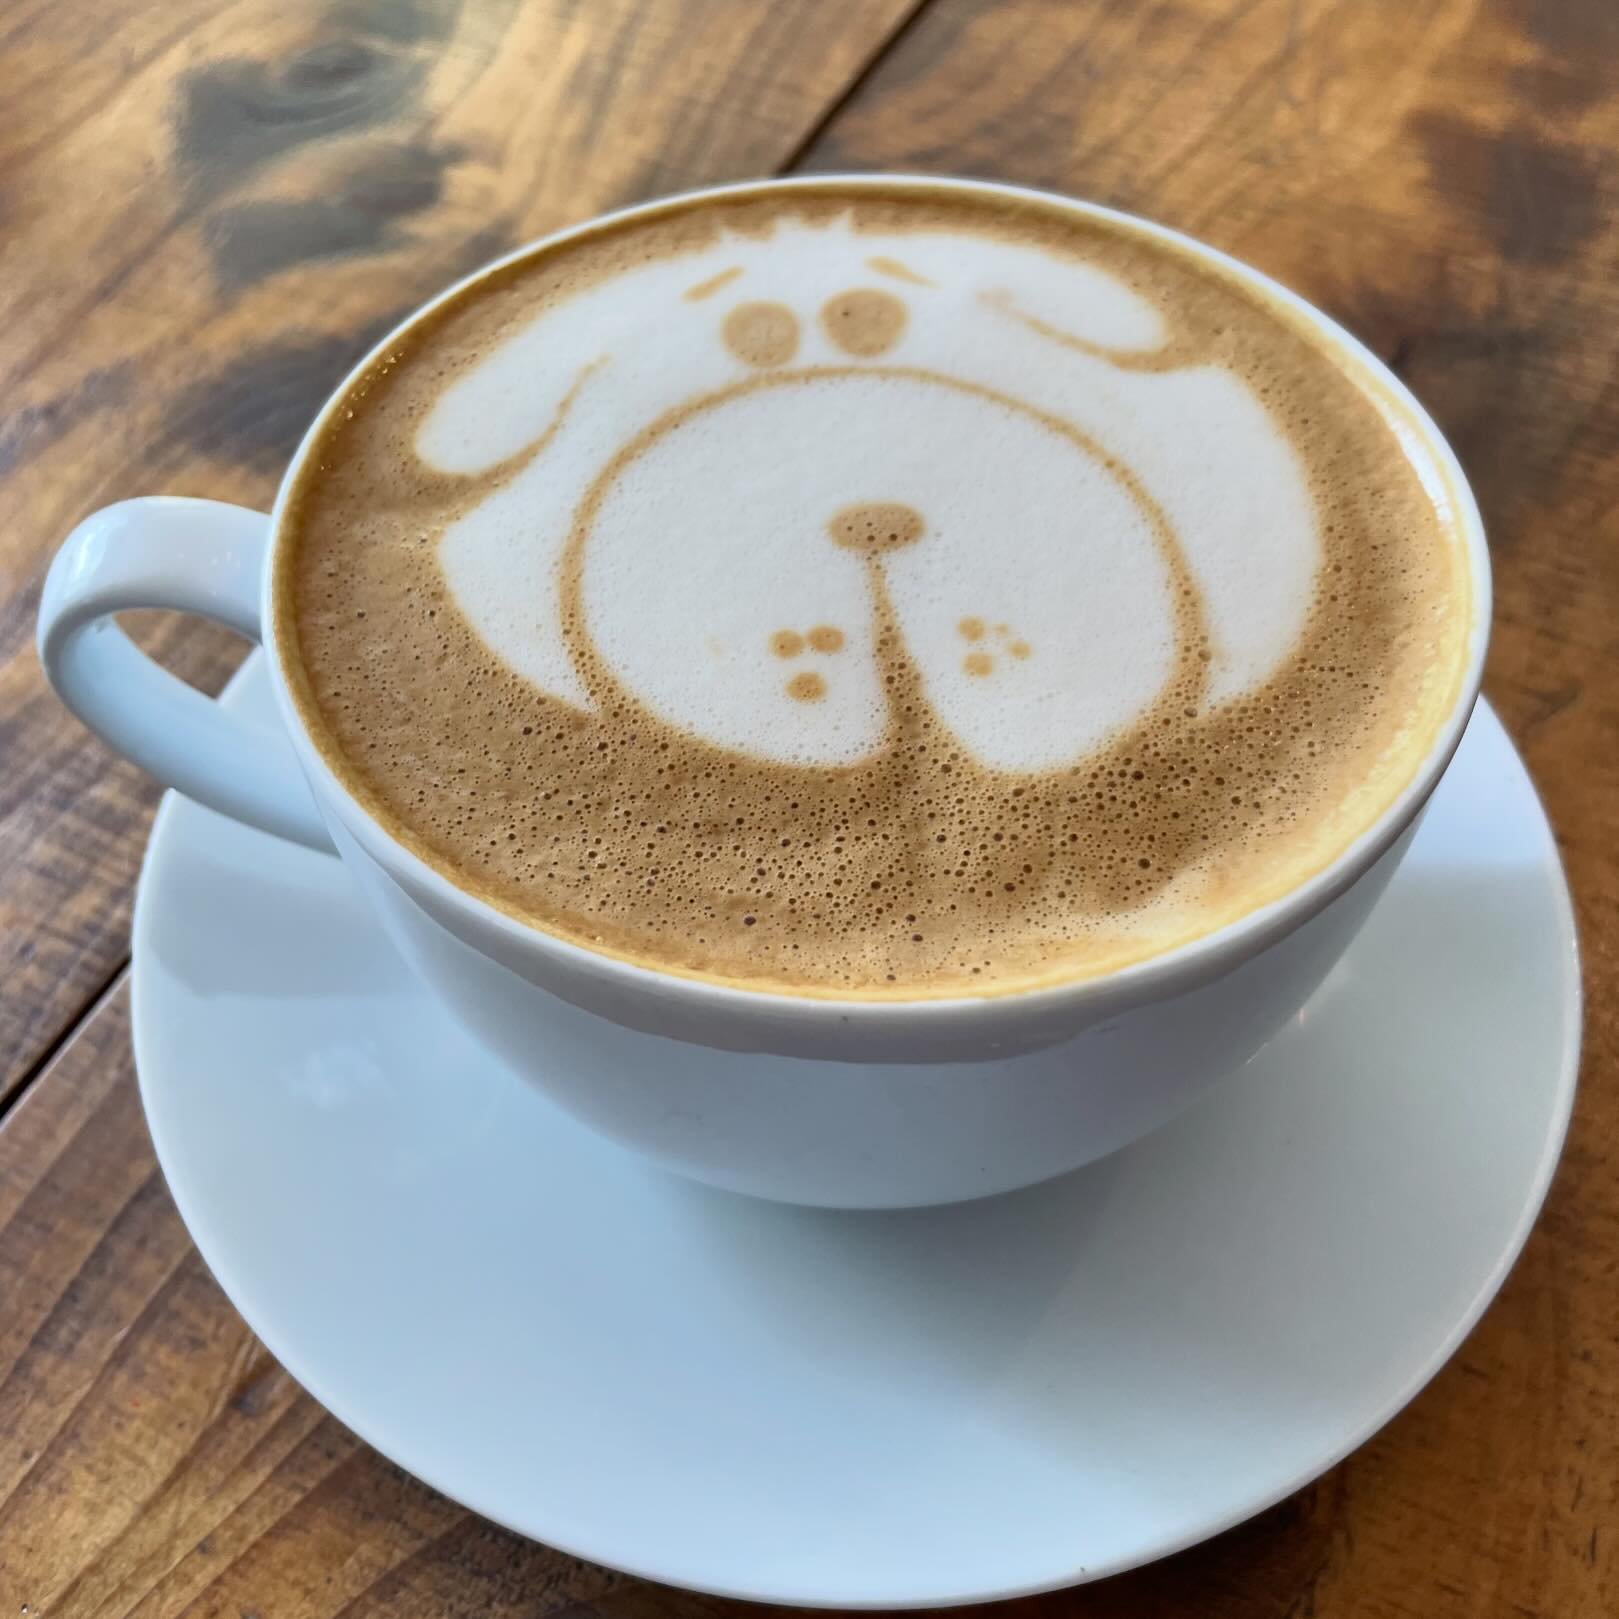 Your coffee is waiting! We can bearly 🐻 wait to see you! Come enjoy a latte on our patio 💙 #downtownarlingtonheights #arlingtonalfresco #summertime #latteart #takeittotheheights #blulovesyou